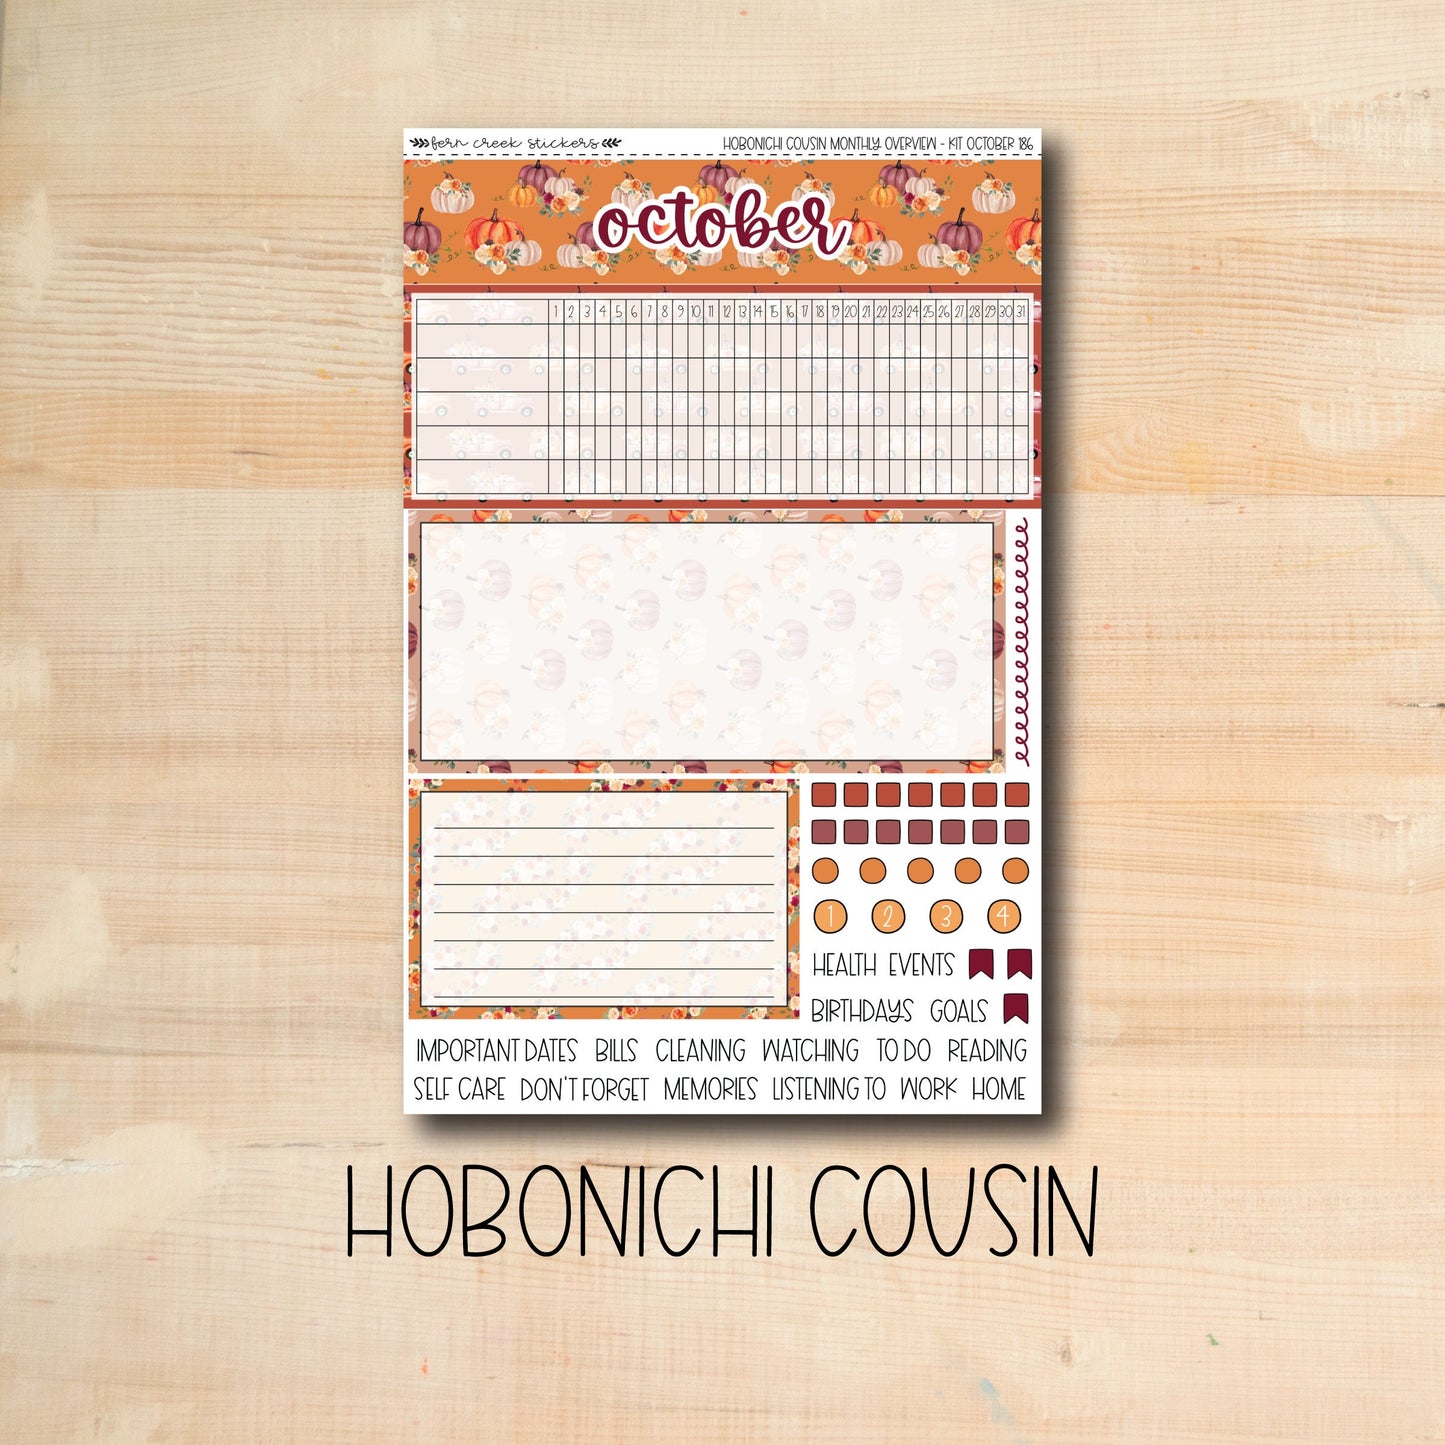 HCMO-186 || PUMPKIN PICKING October Hobonichi Cousin monthly overview